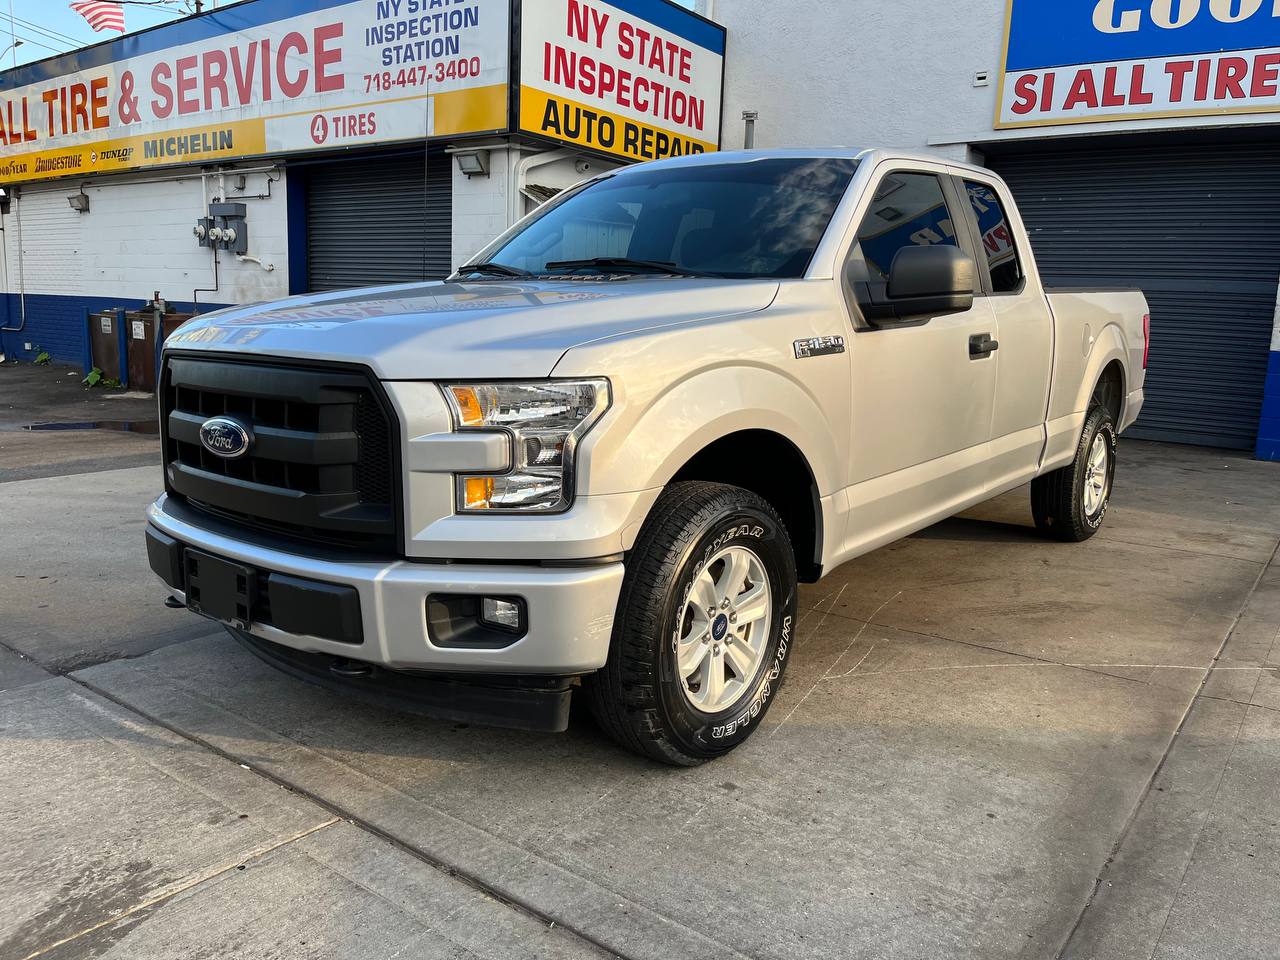 Used Car - 2017 Ford F-150 XL 4x4 SuperCab for Sale in Staten Island, NY